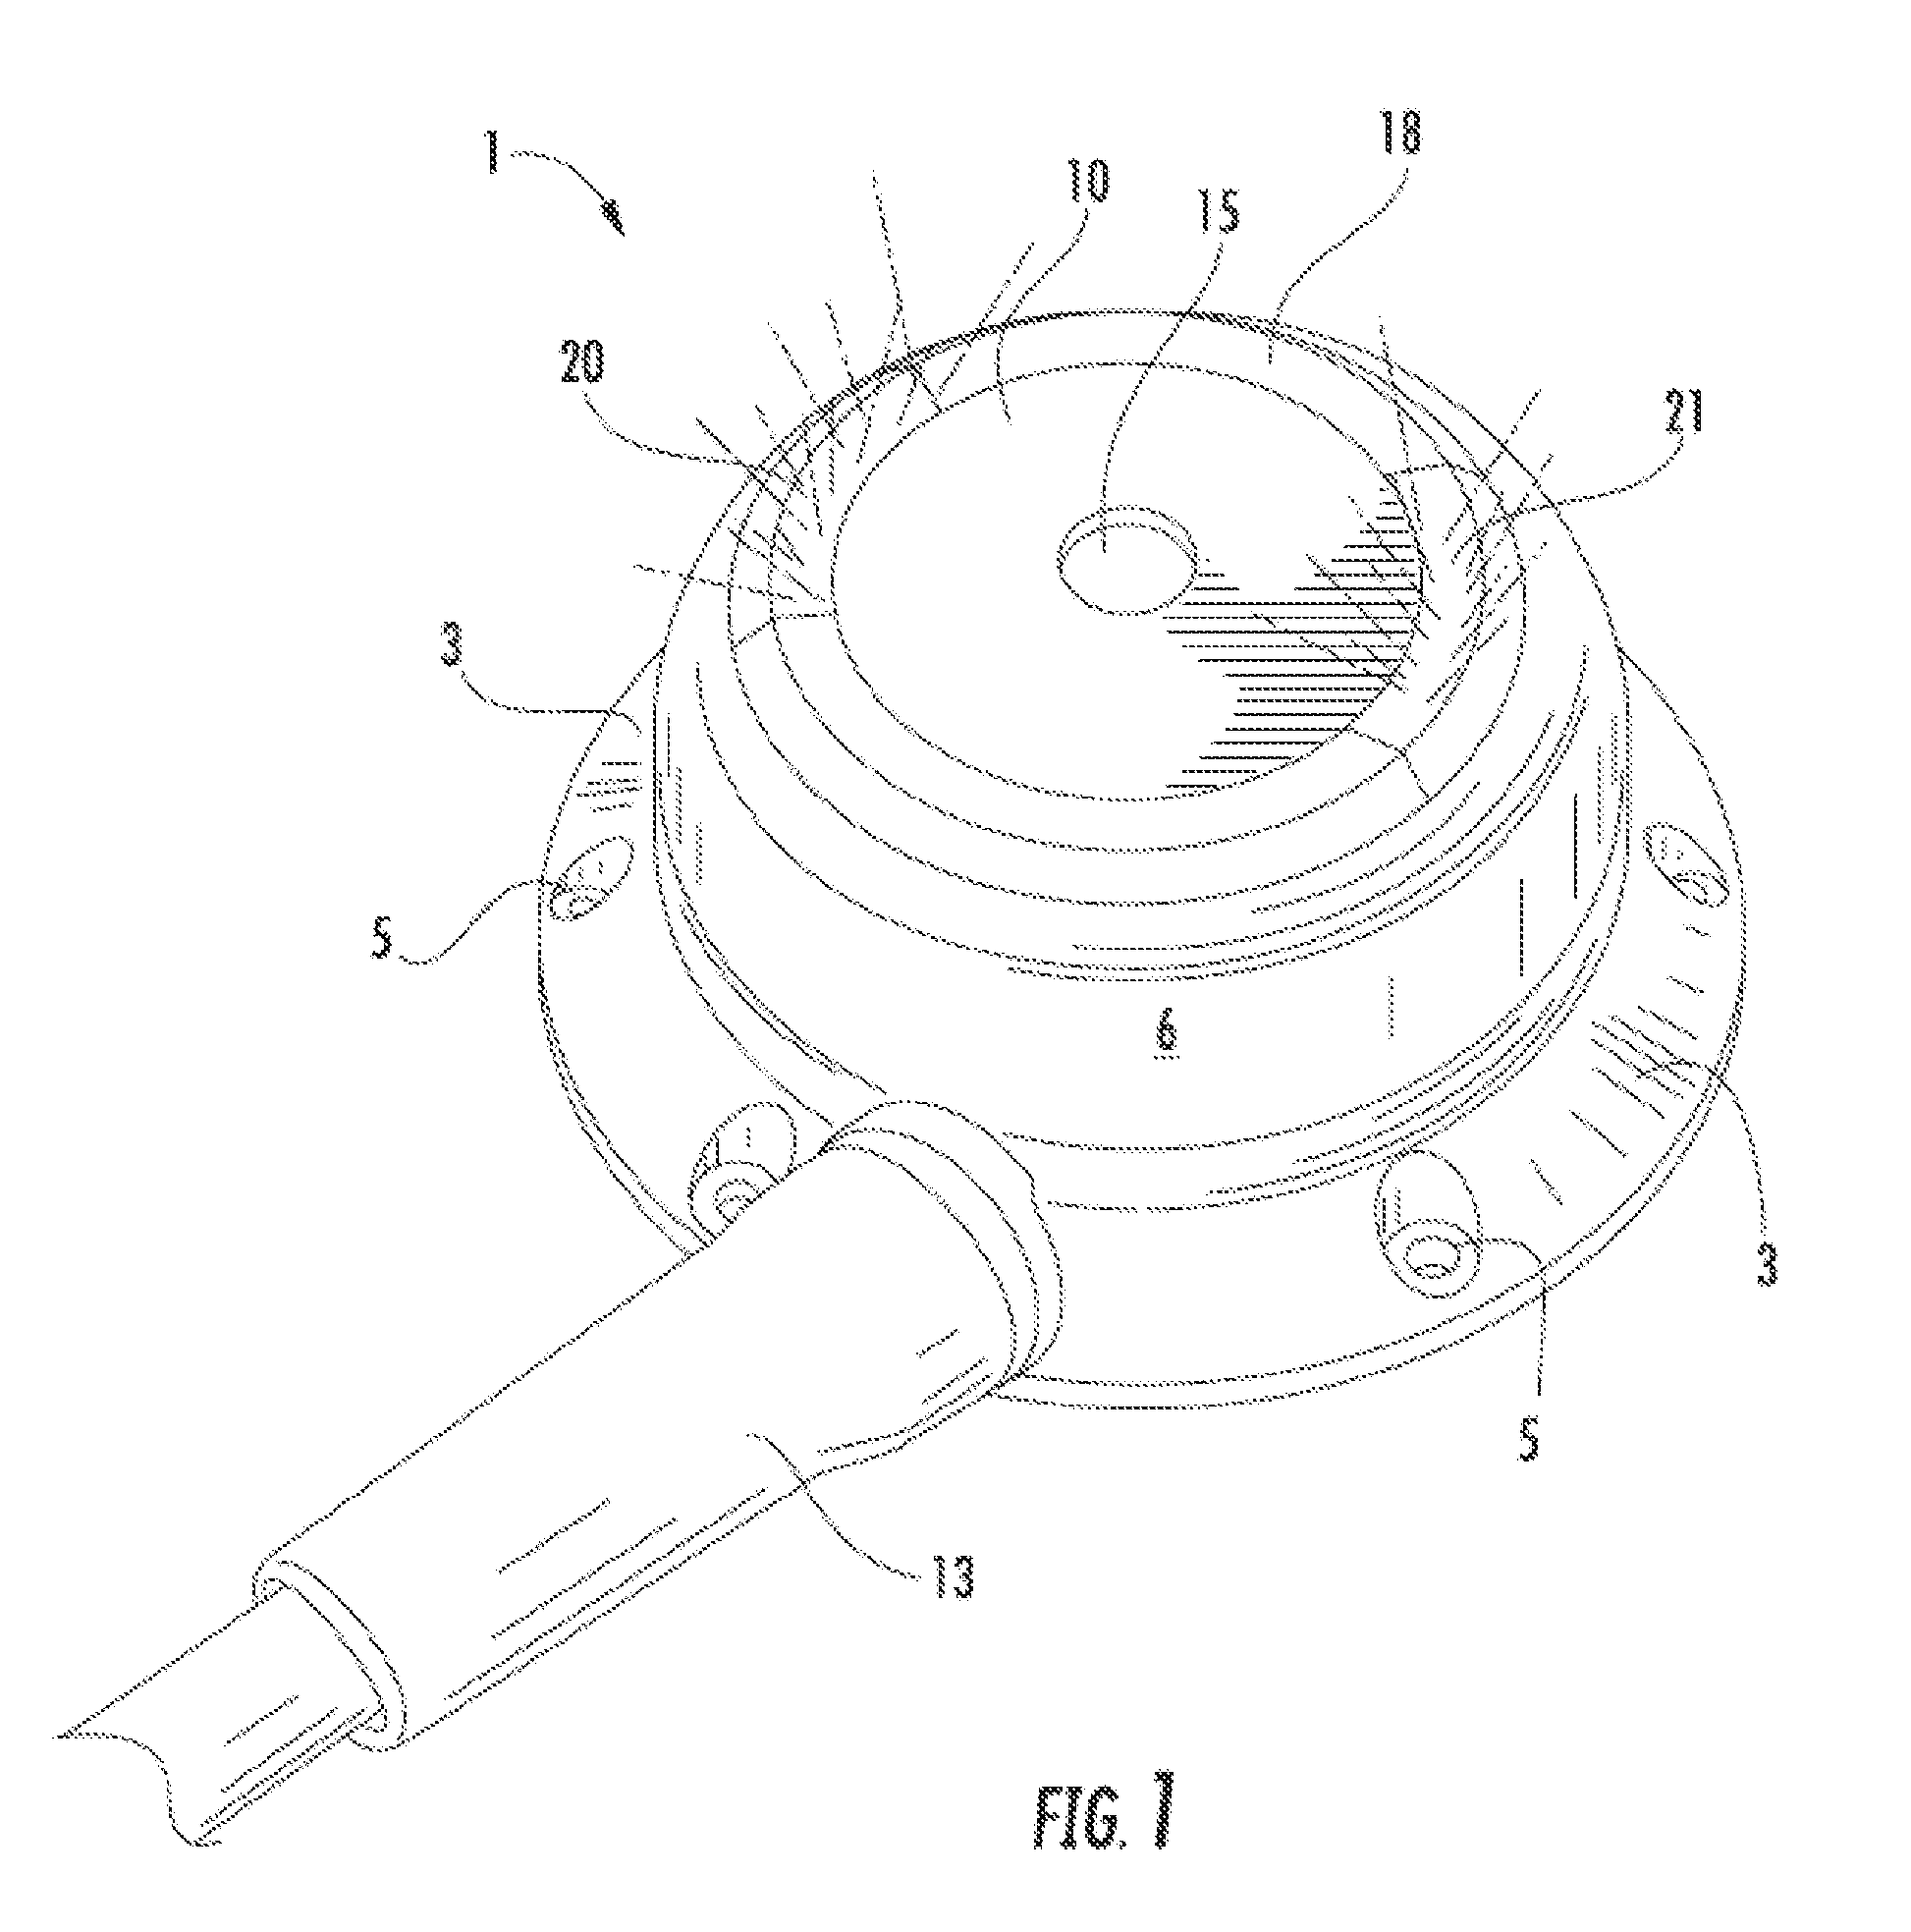 Method and device for easy access to subintimally implanted vascular access ports